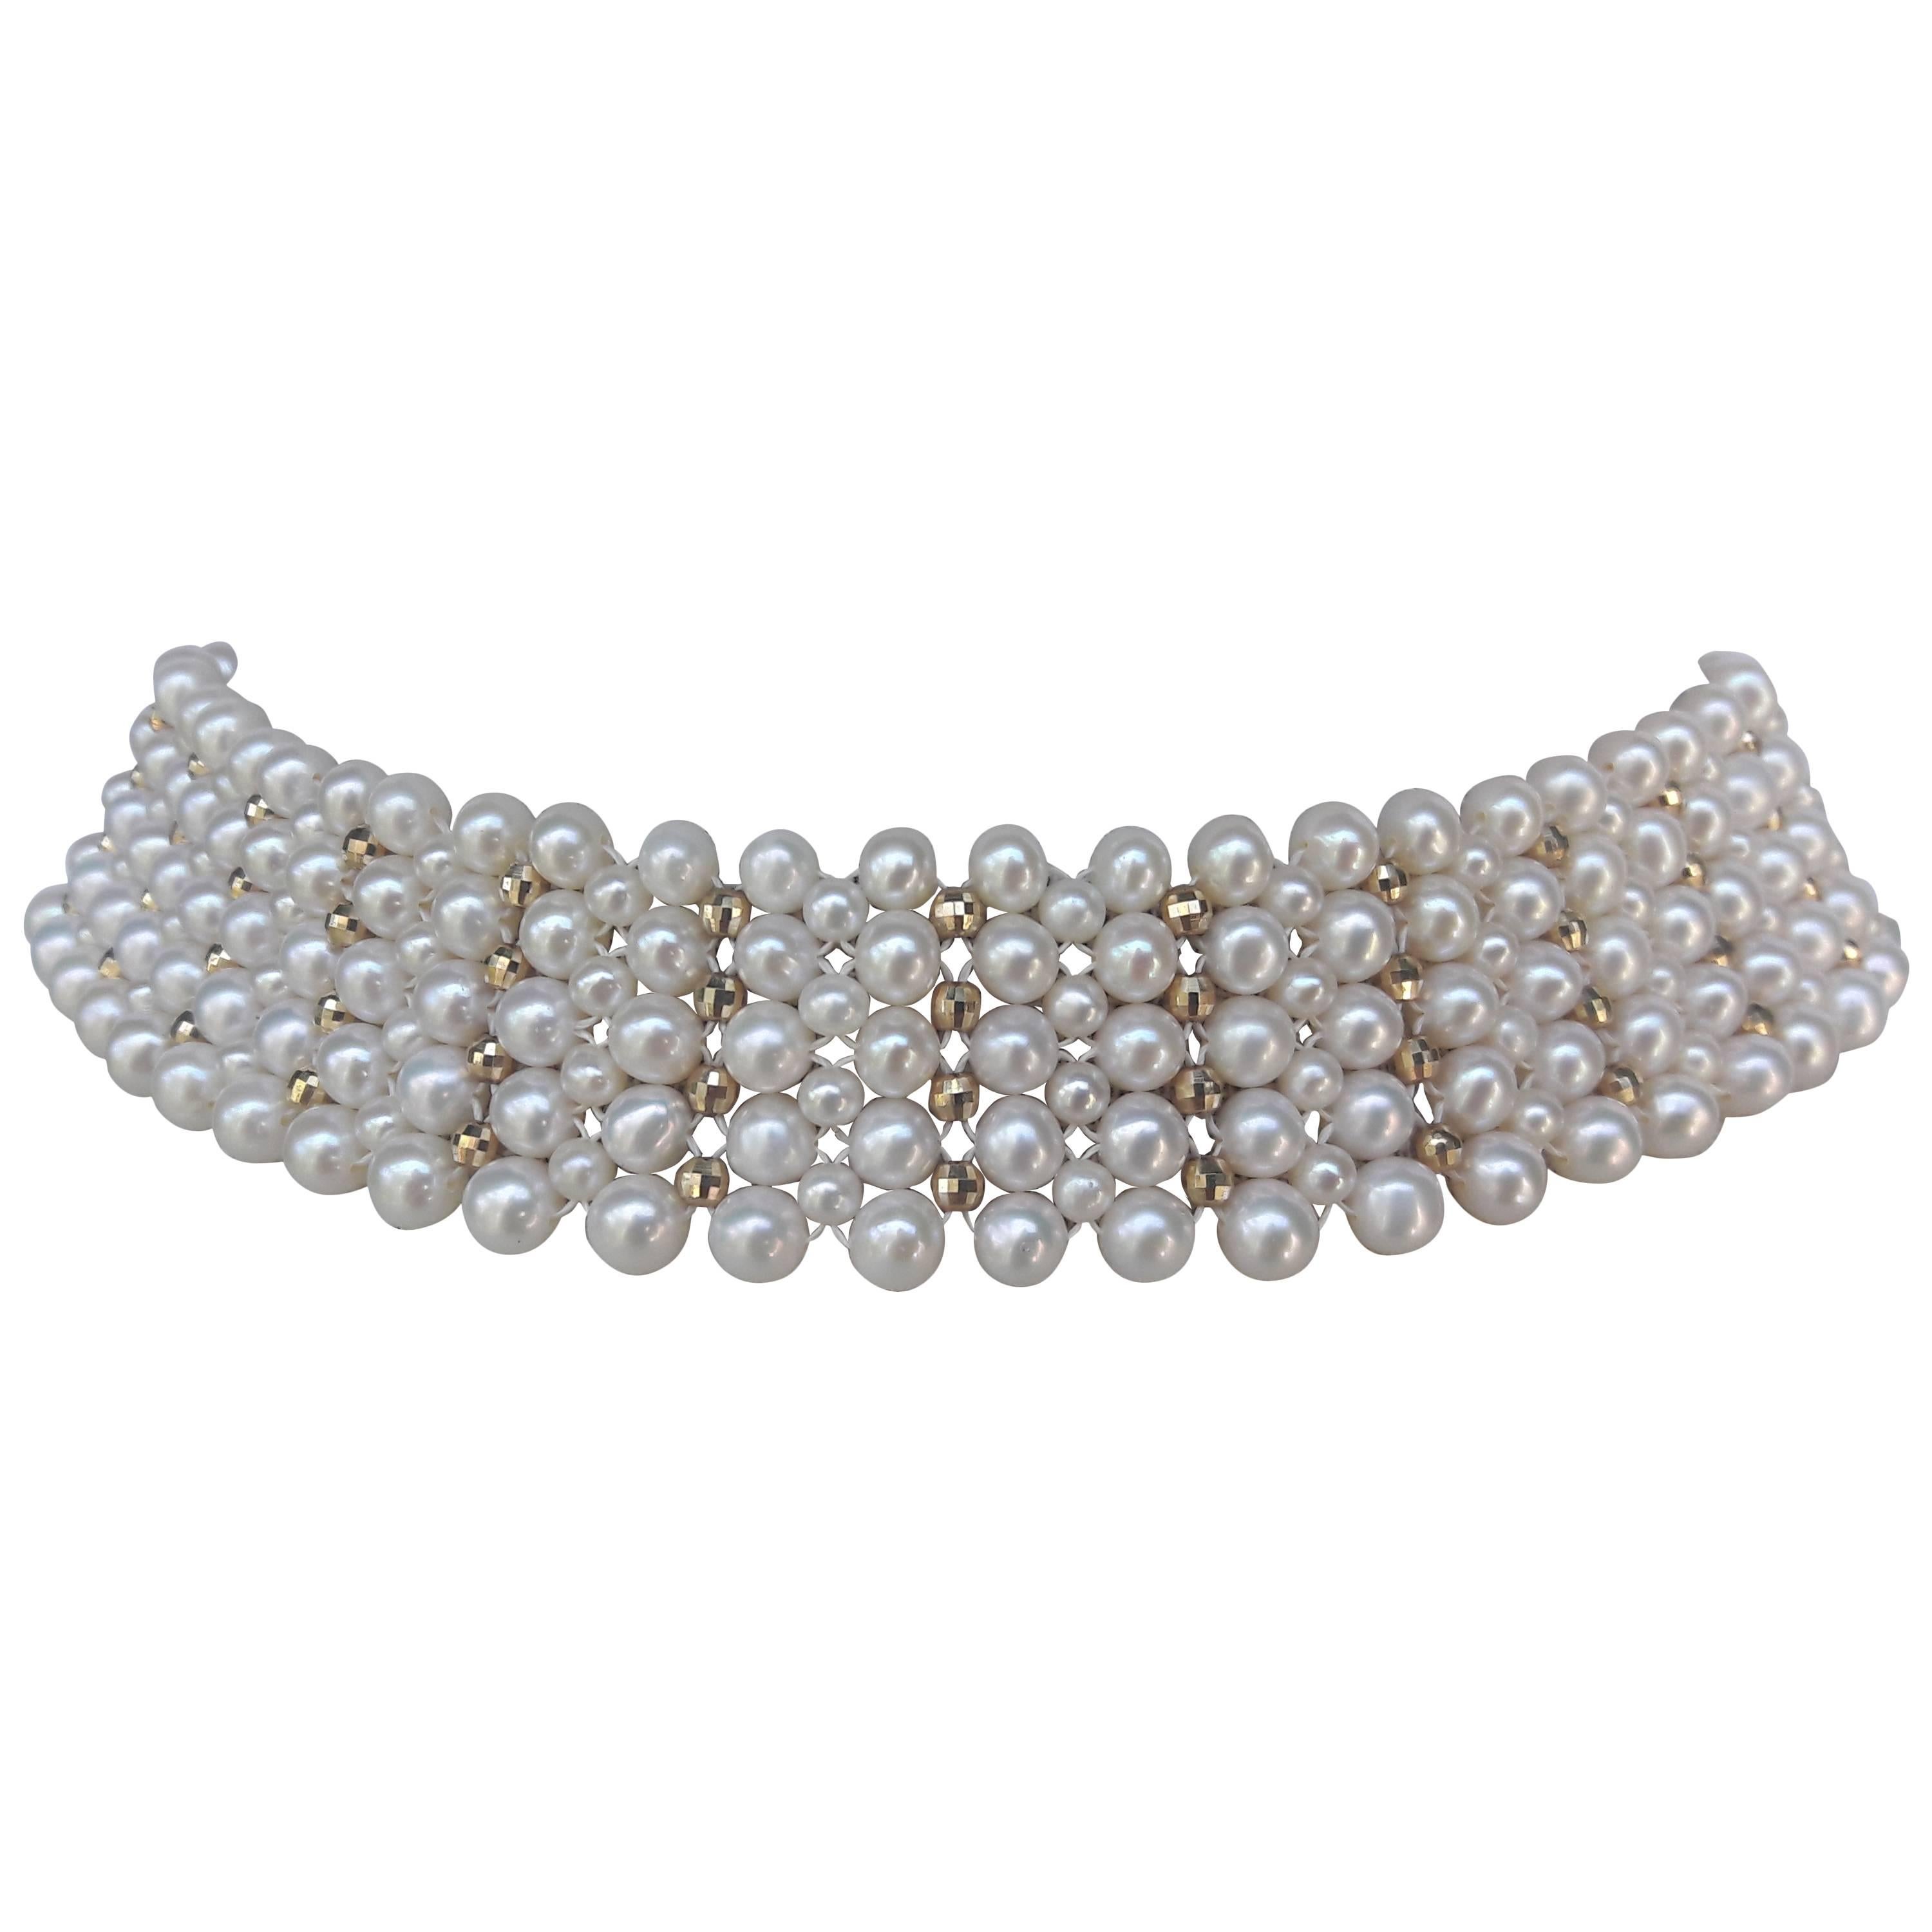 Woven Pearl Choker with Gold Faceted Beads and Adjustable Gold Clasp